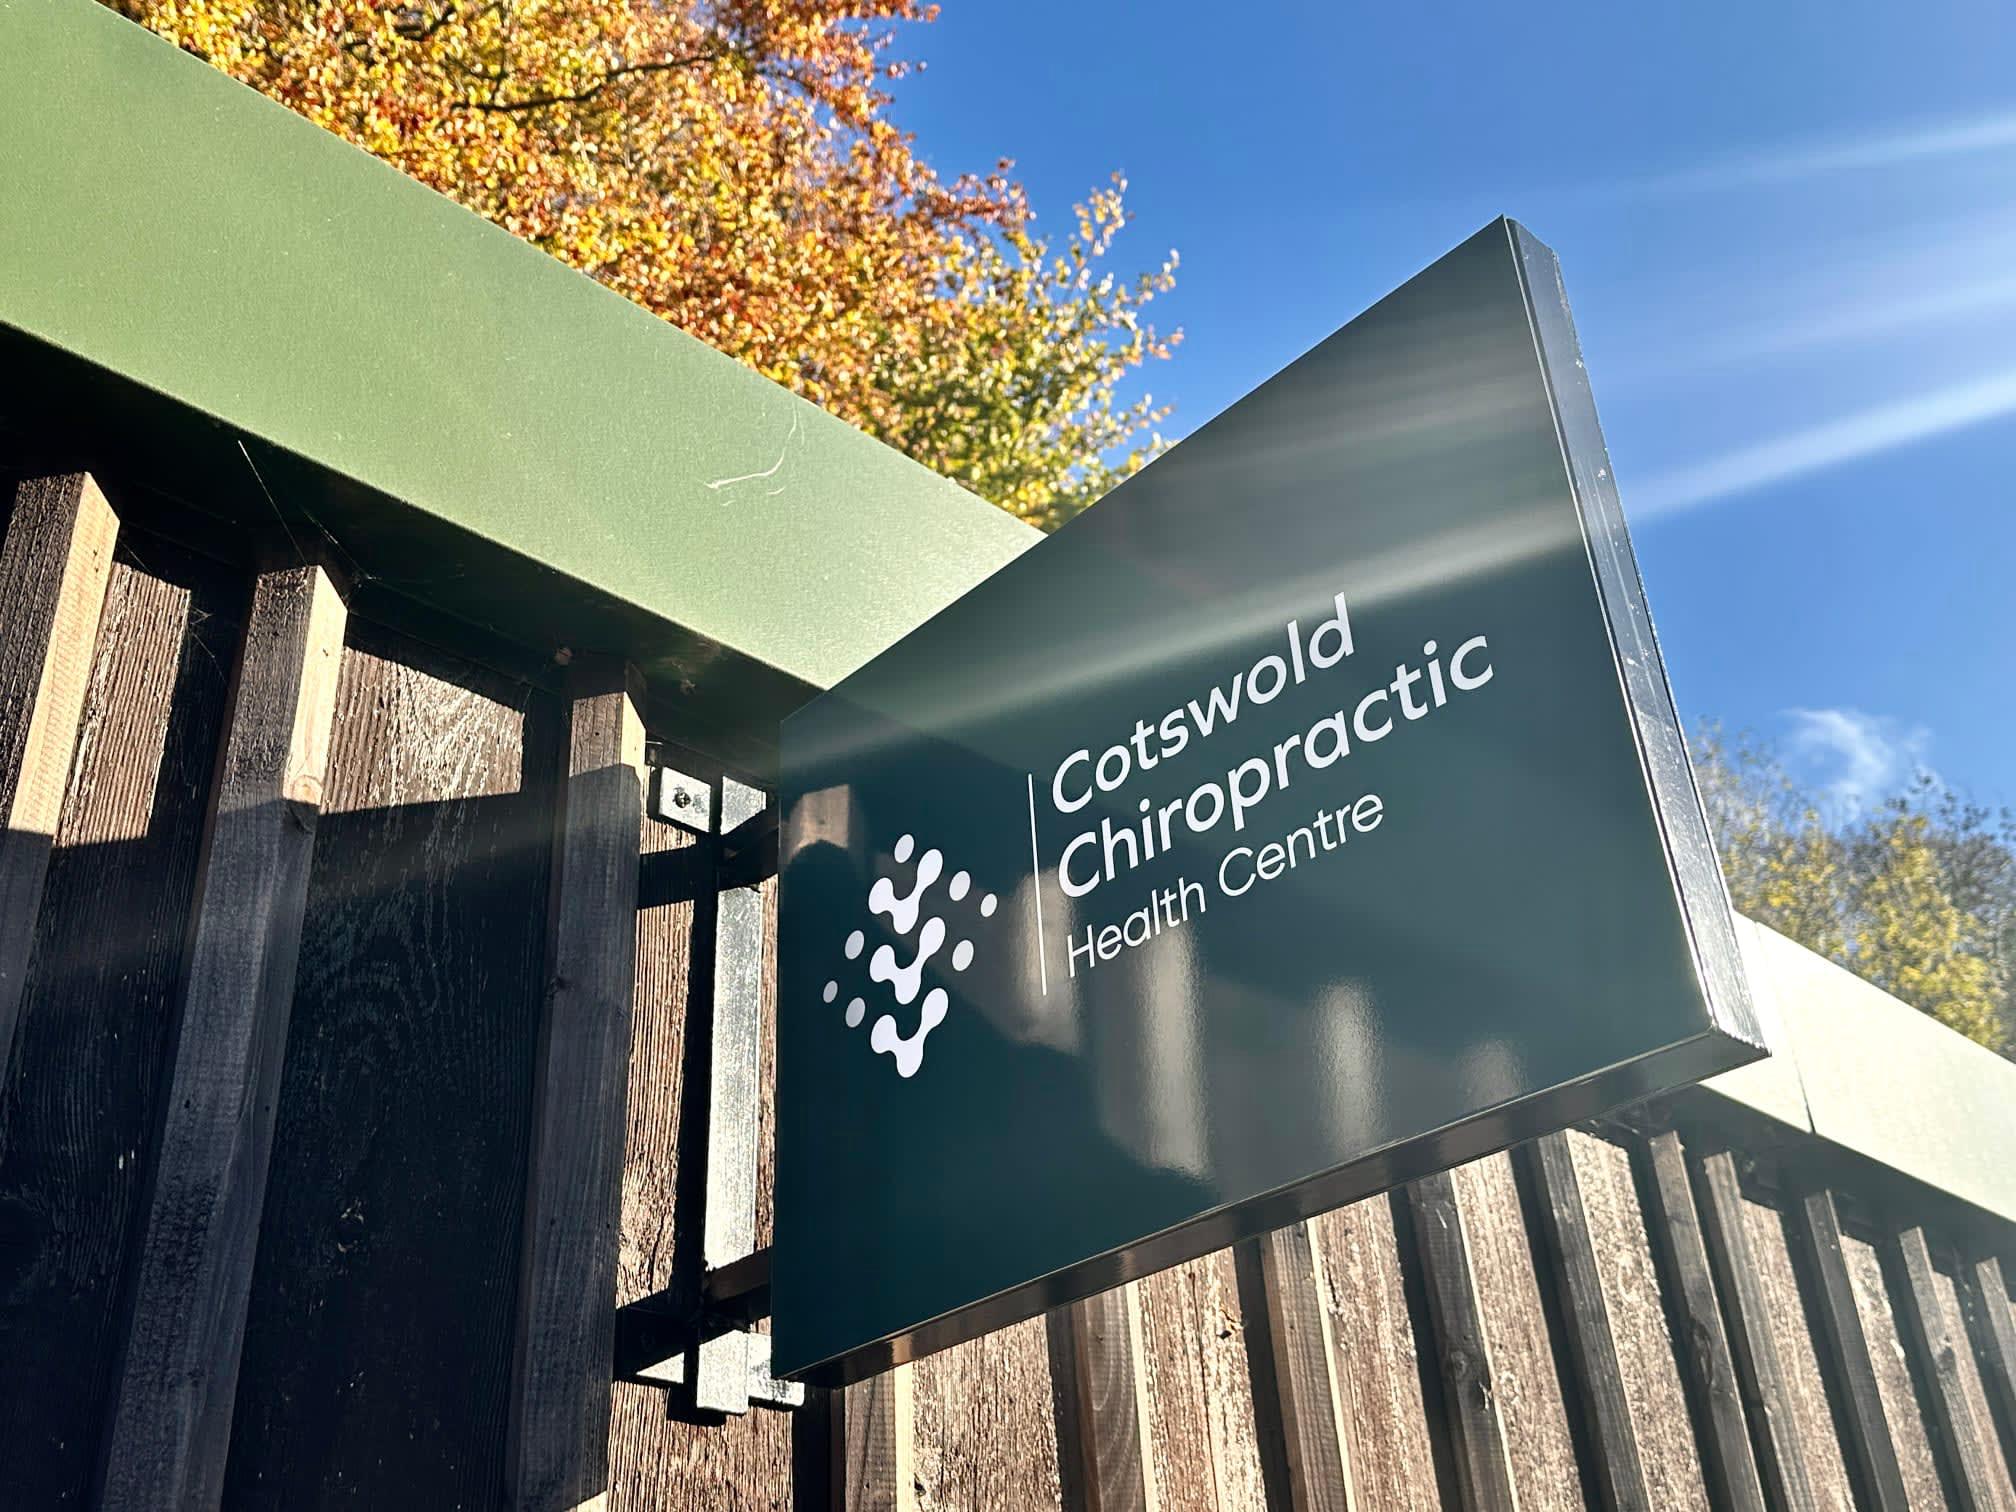 Images Cotswold Chiropractic Health Centre